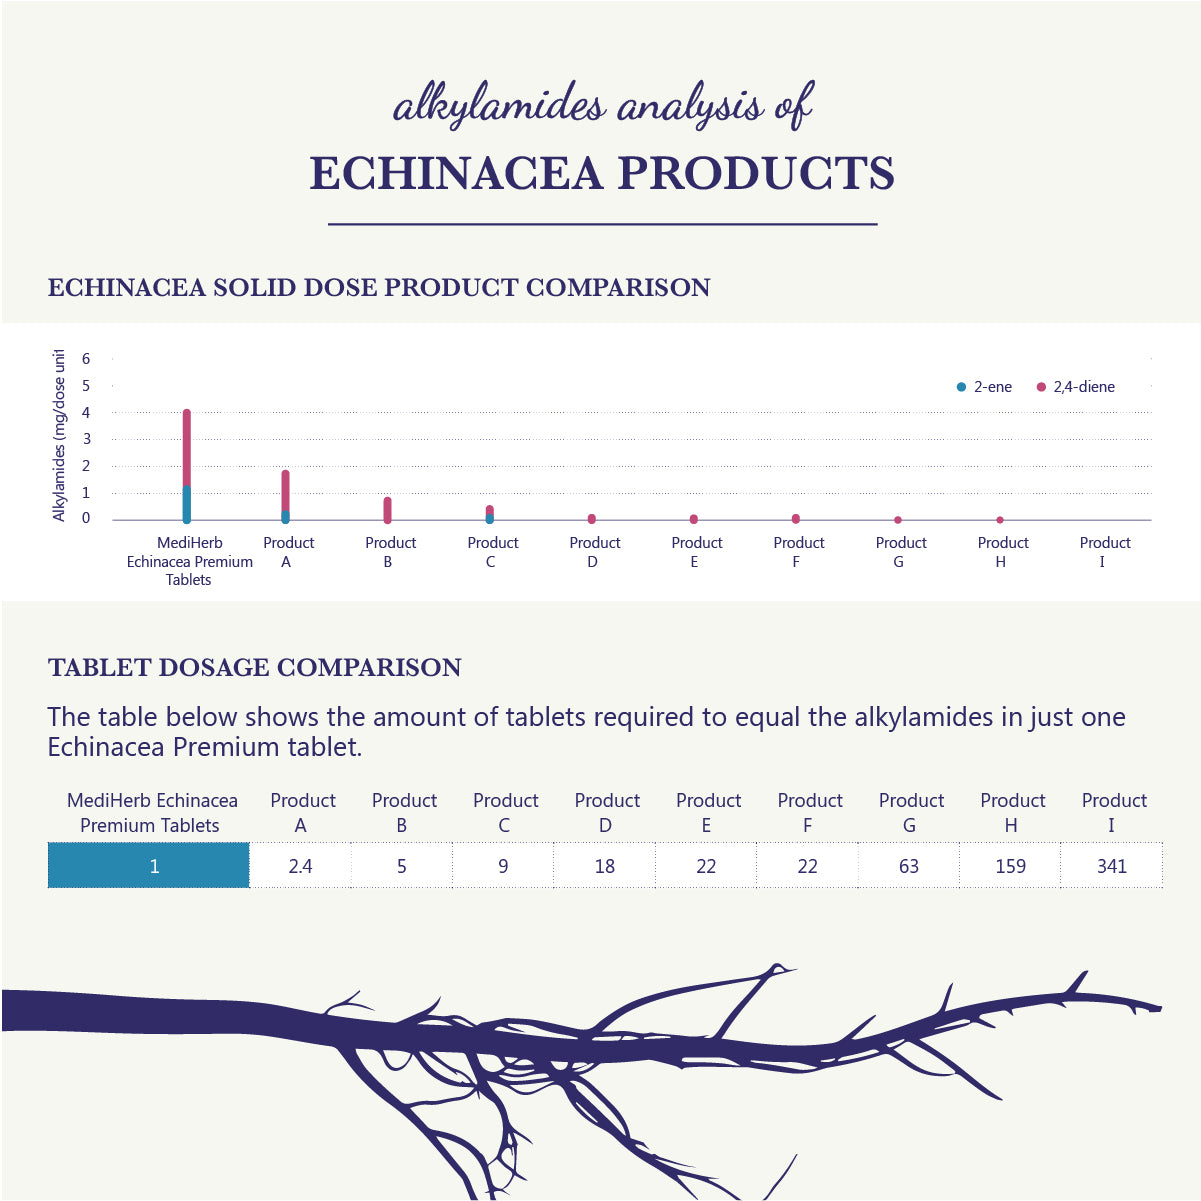 Echinacea tablet dose competitor analysis